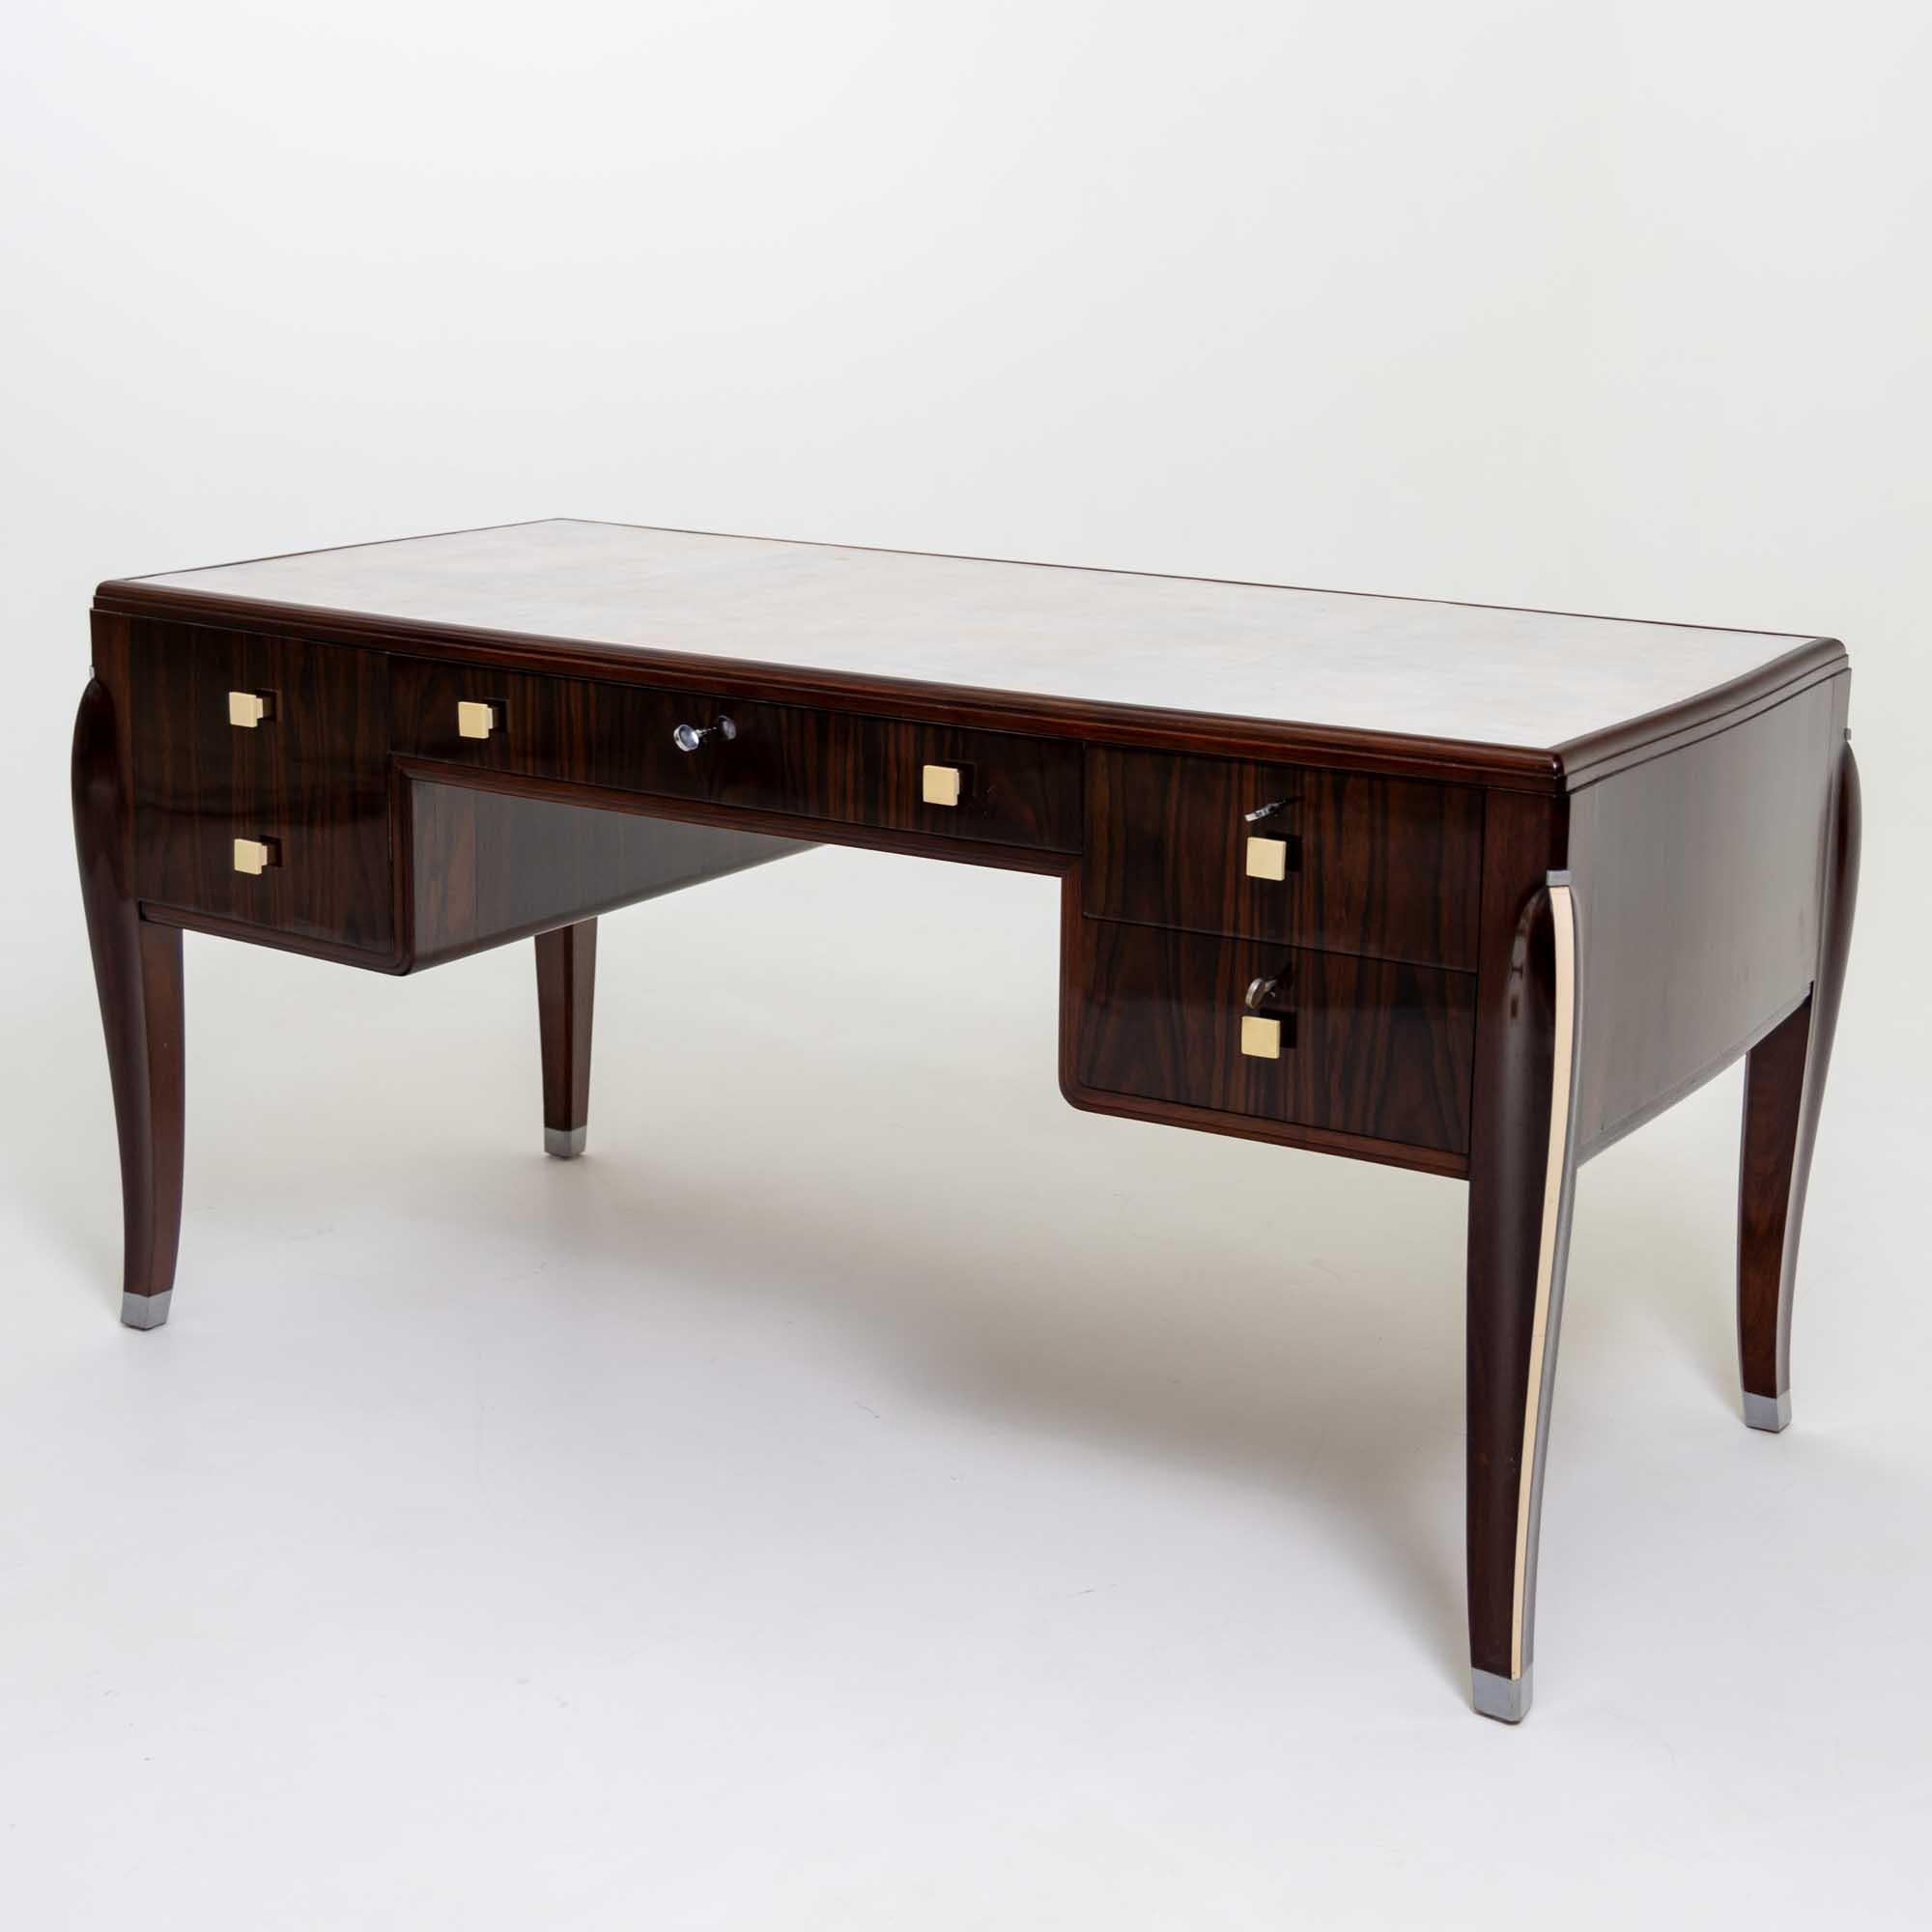 Polished Art Deco Desk in the style of Jacques-Emile Ruhlmann (1879-1933), France, 1920s For Sale